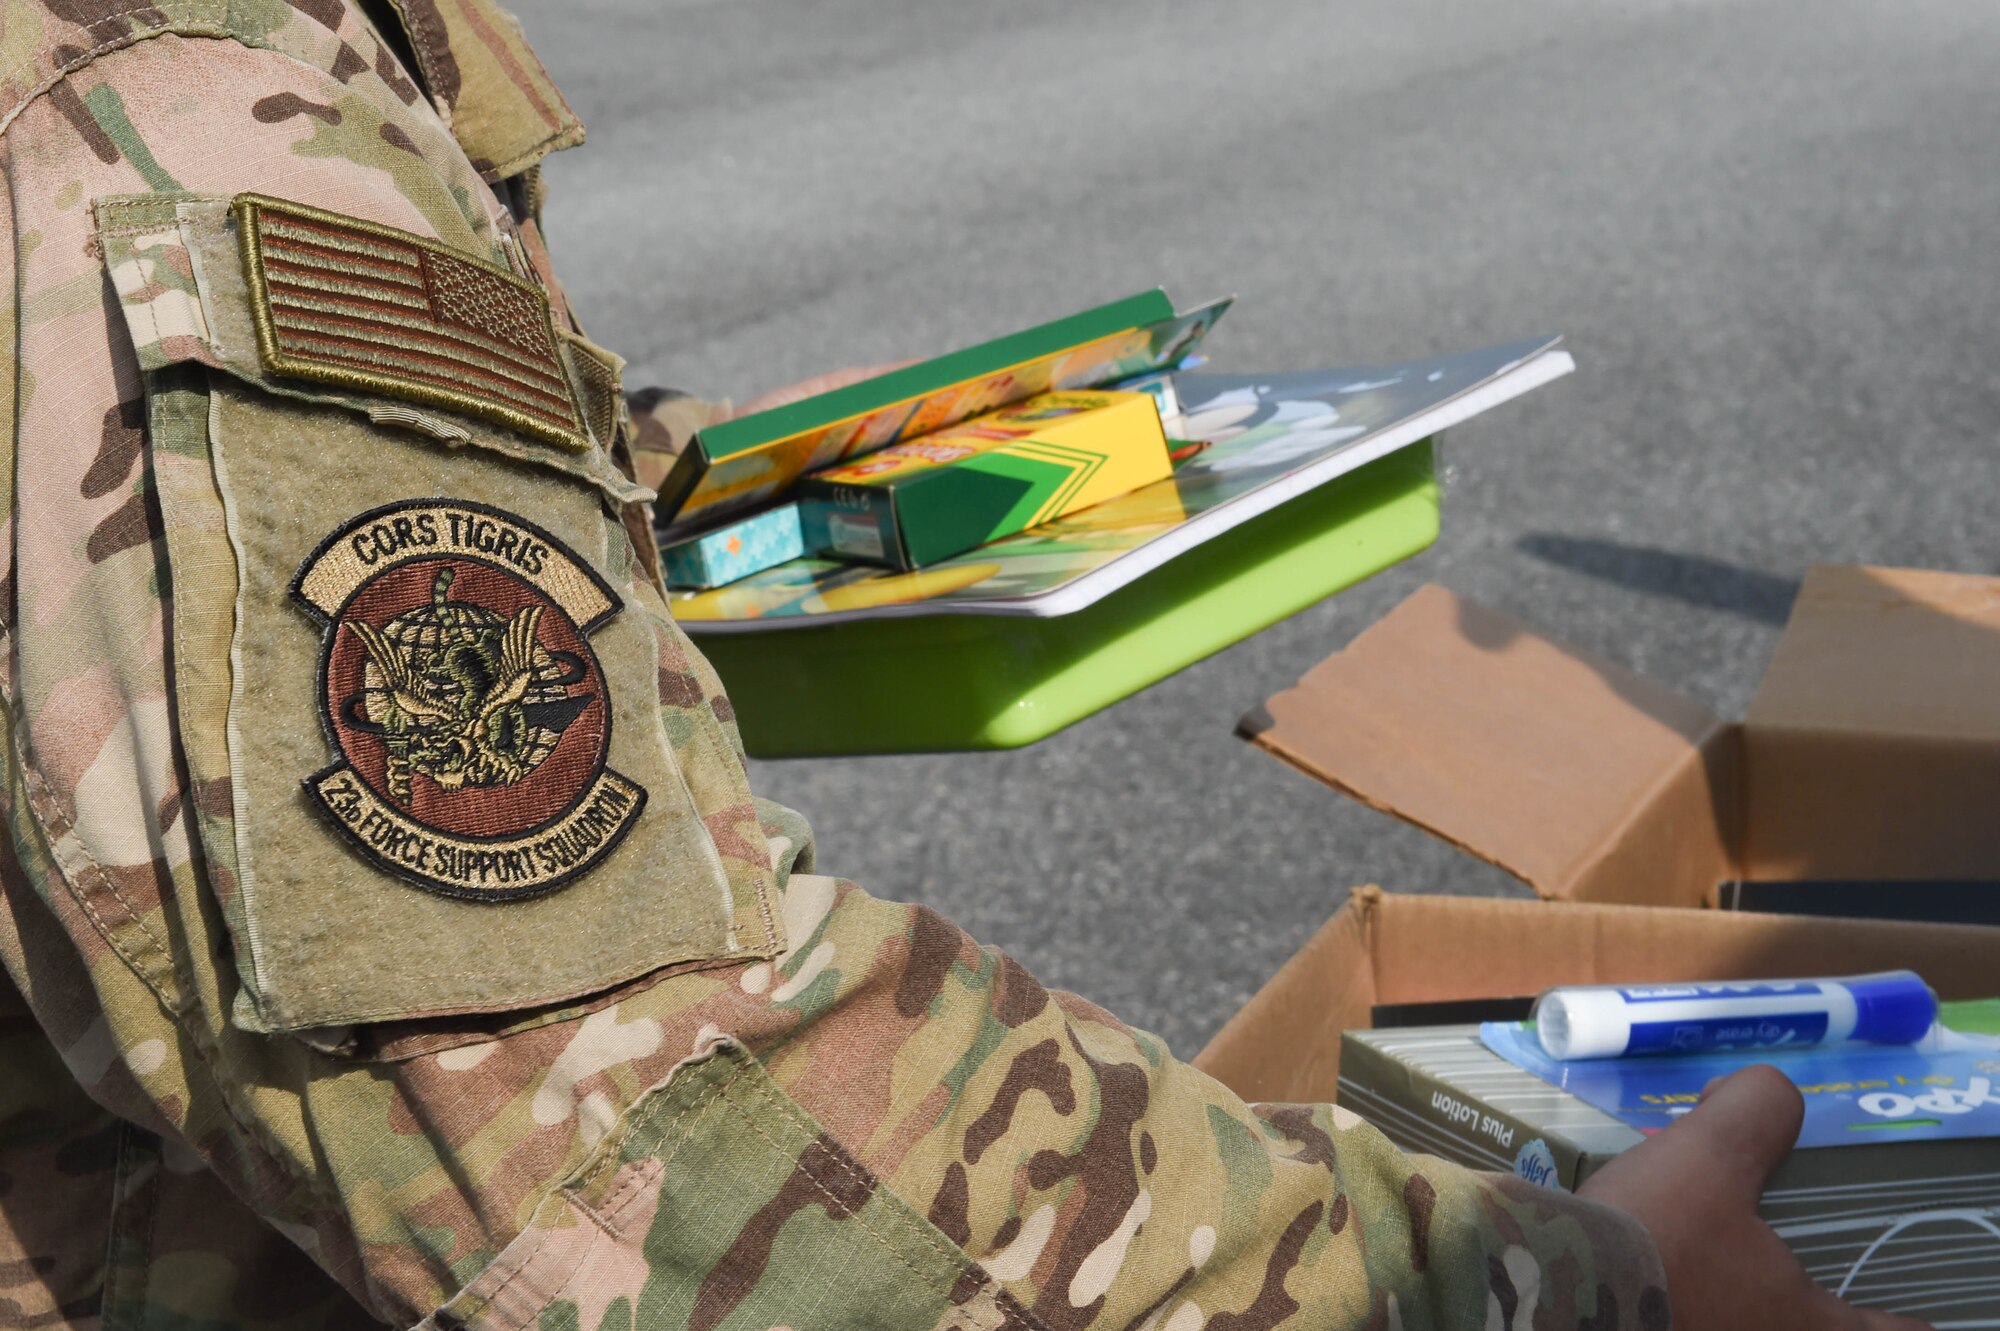 U.S. Air Force Tech. Sgt. Jeremy Kanapaux, 23rd Force Support Squadron readiness non-commissioned officer, gathers school supplies during an event supporting Operation Homefront at Moody Air Force Base, Georgia, July 26, 2021. Volunteers and event coordinators handed out 192 bags of school supplies to Airmen, E-6 and below. (U.S. Air Force photo by Senior Airman Rebeckah Medeiros)